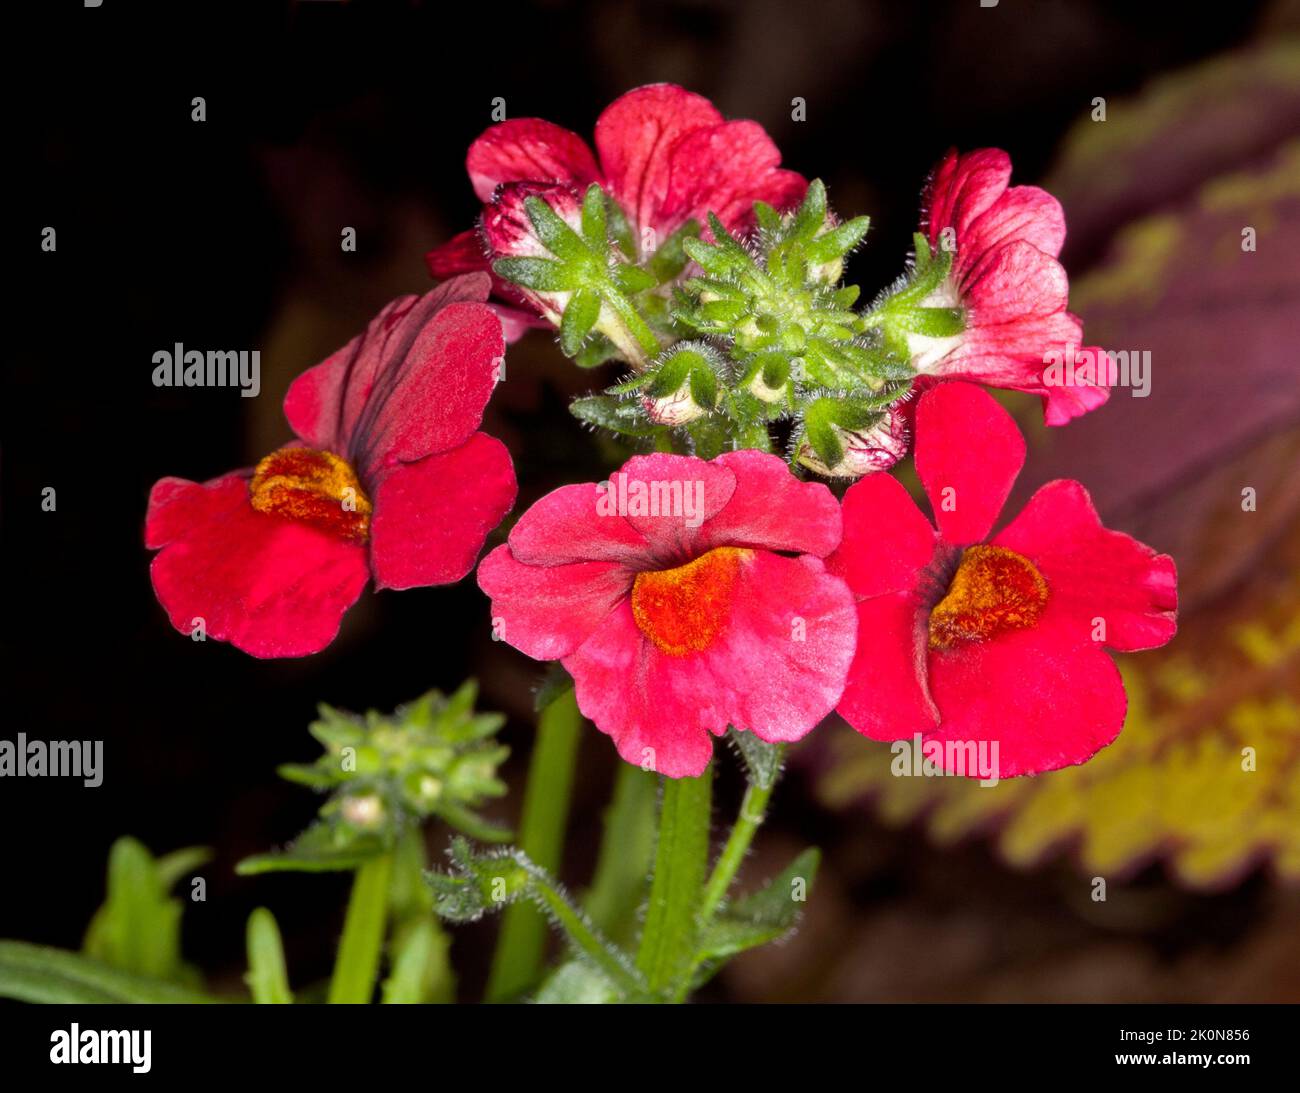 Cluster of vivid red flowers of Nemesia, an annual garden plant,  against a dark background Stock Photo